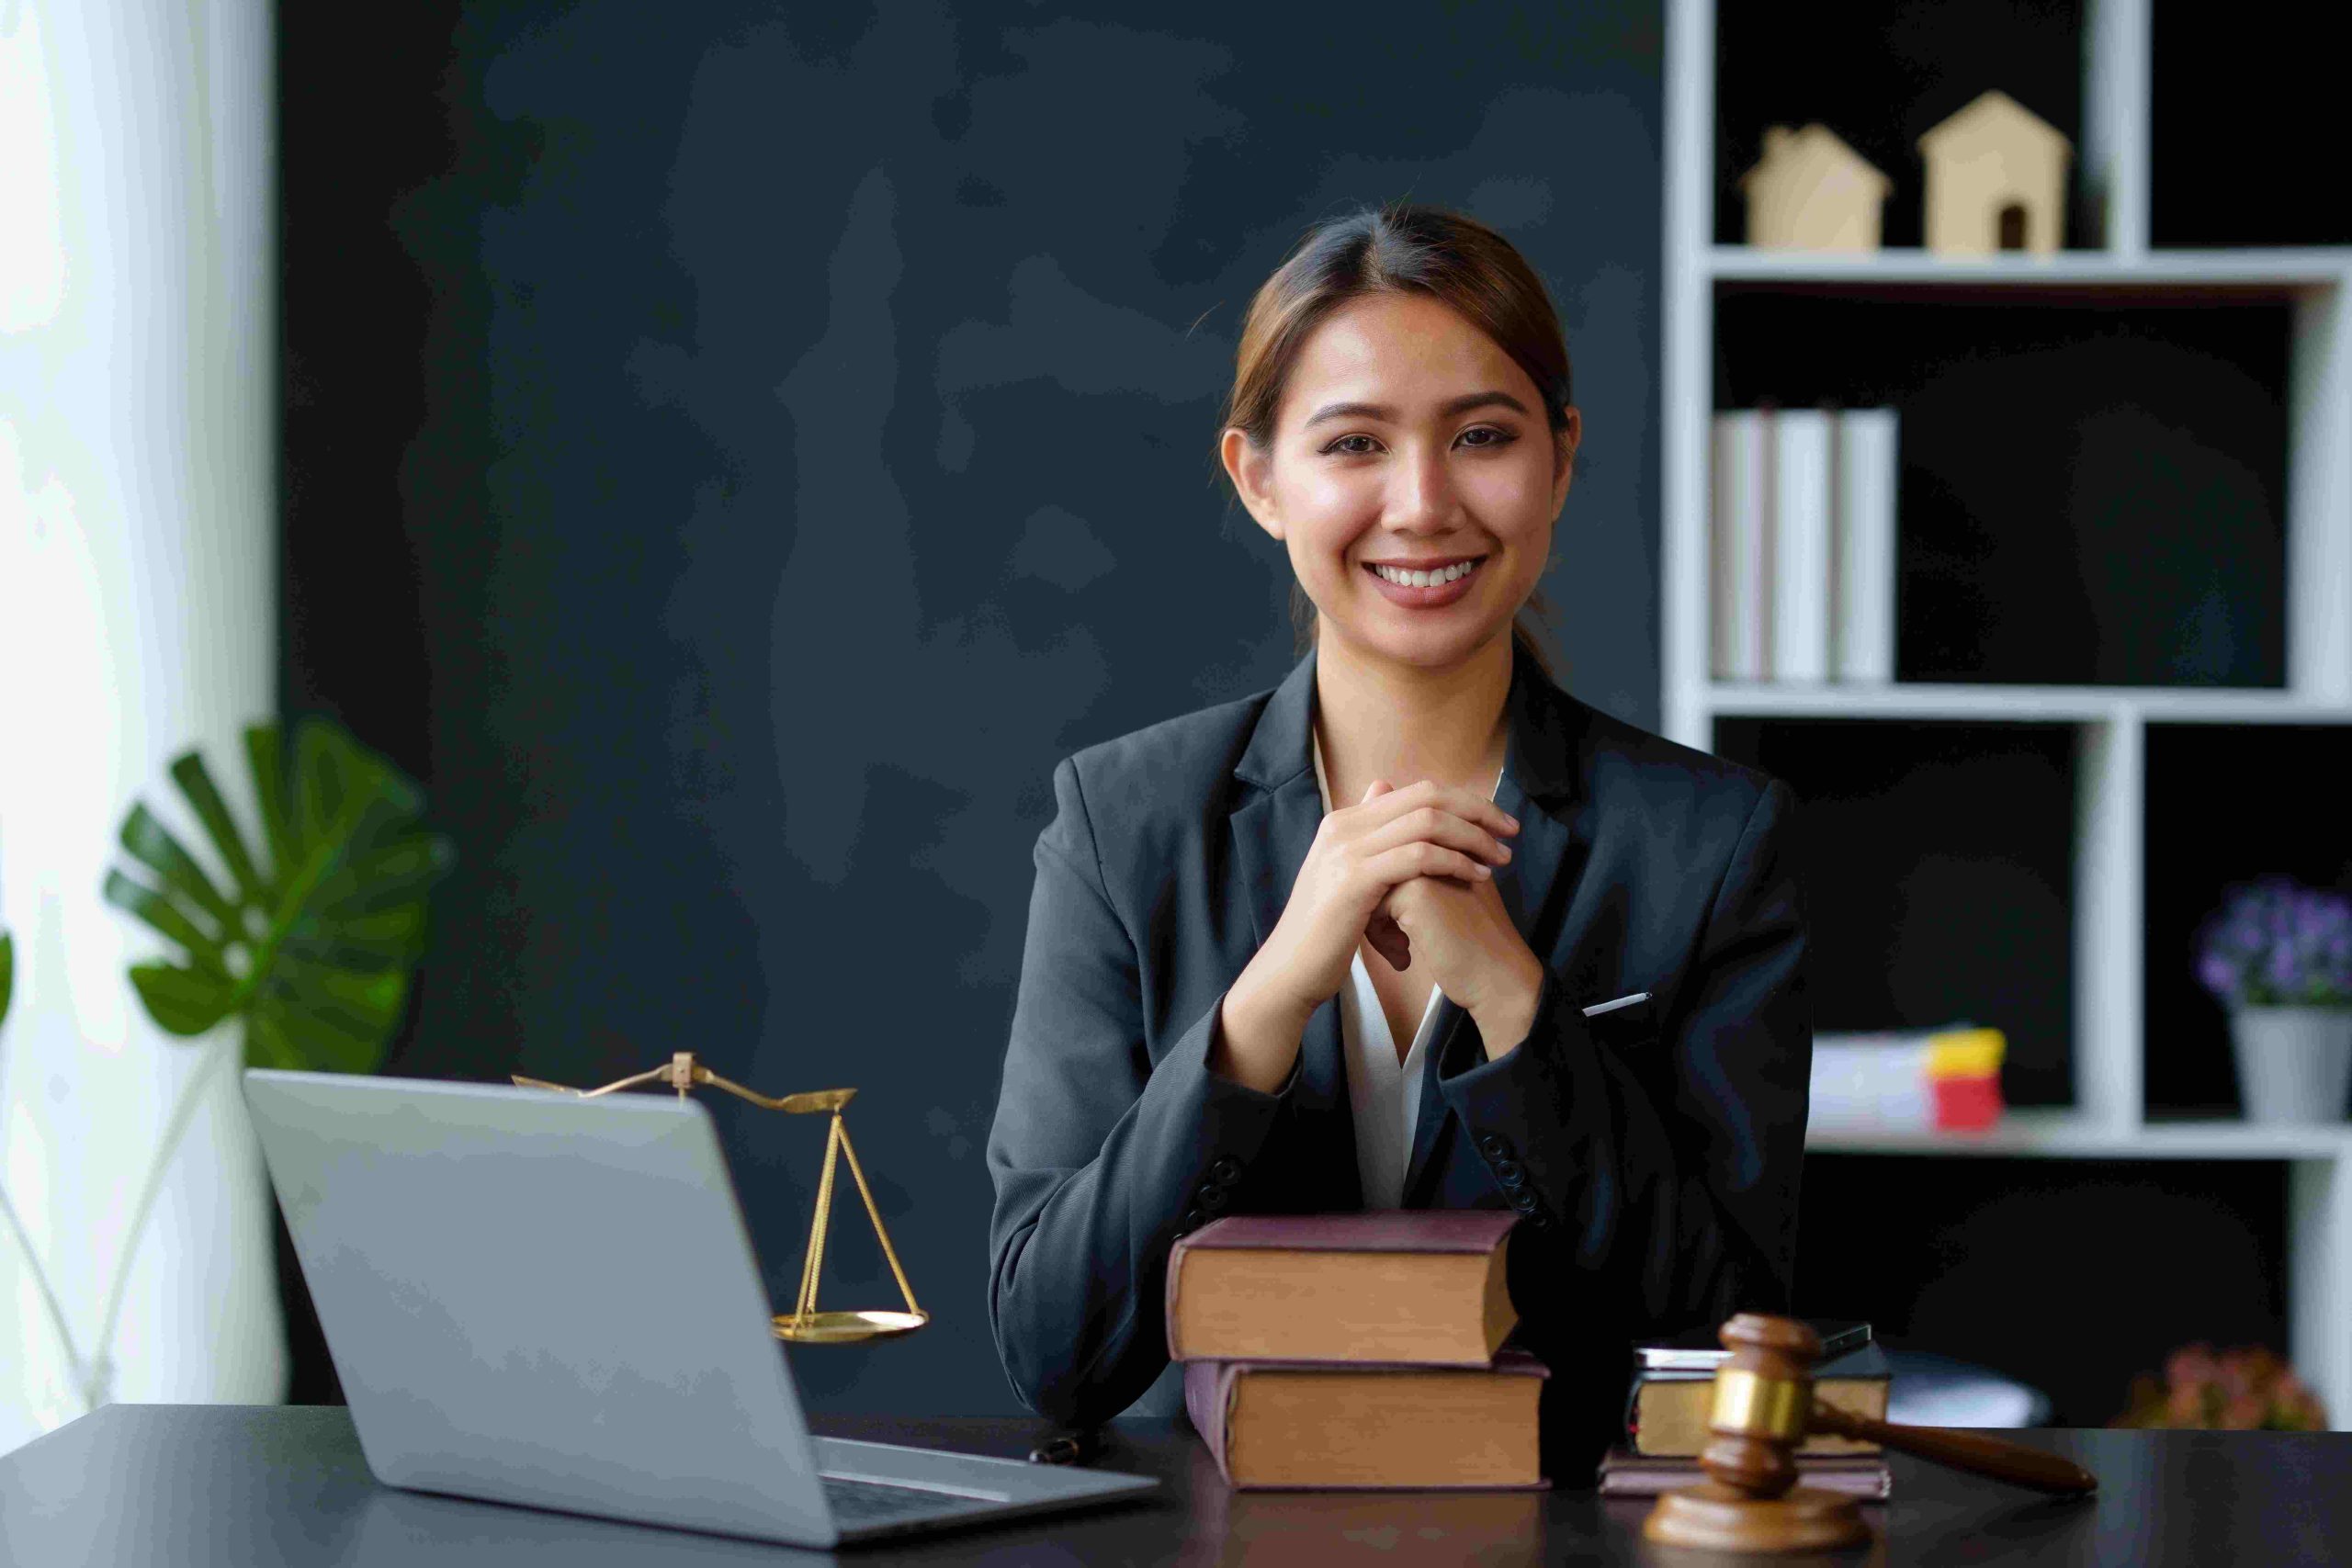 Attorney is happy with Webaholics Lawyer Lead Gen Services